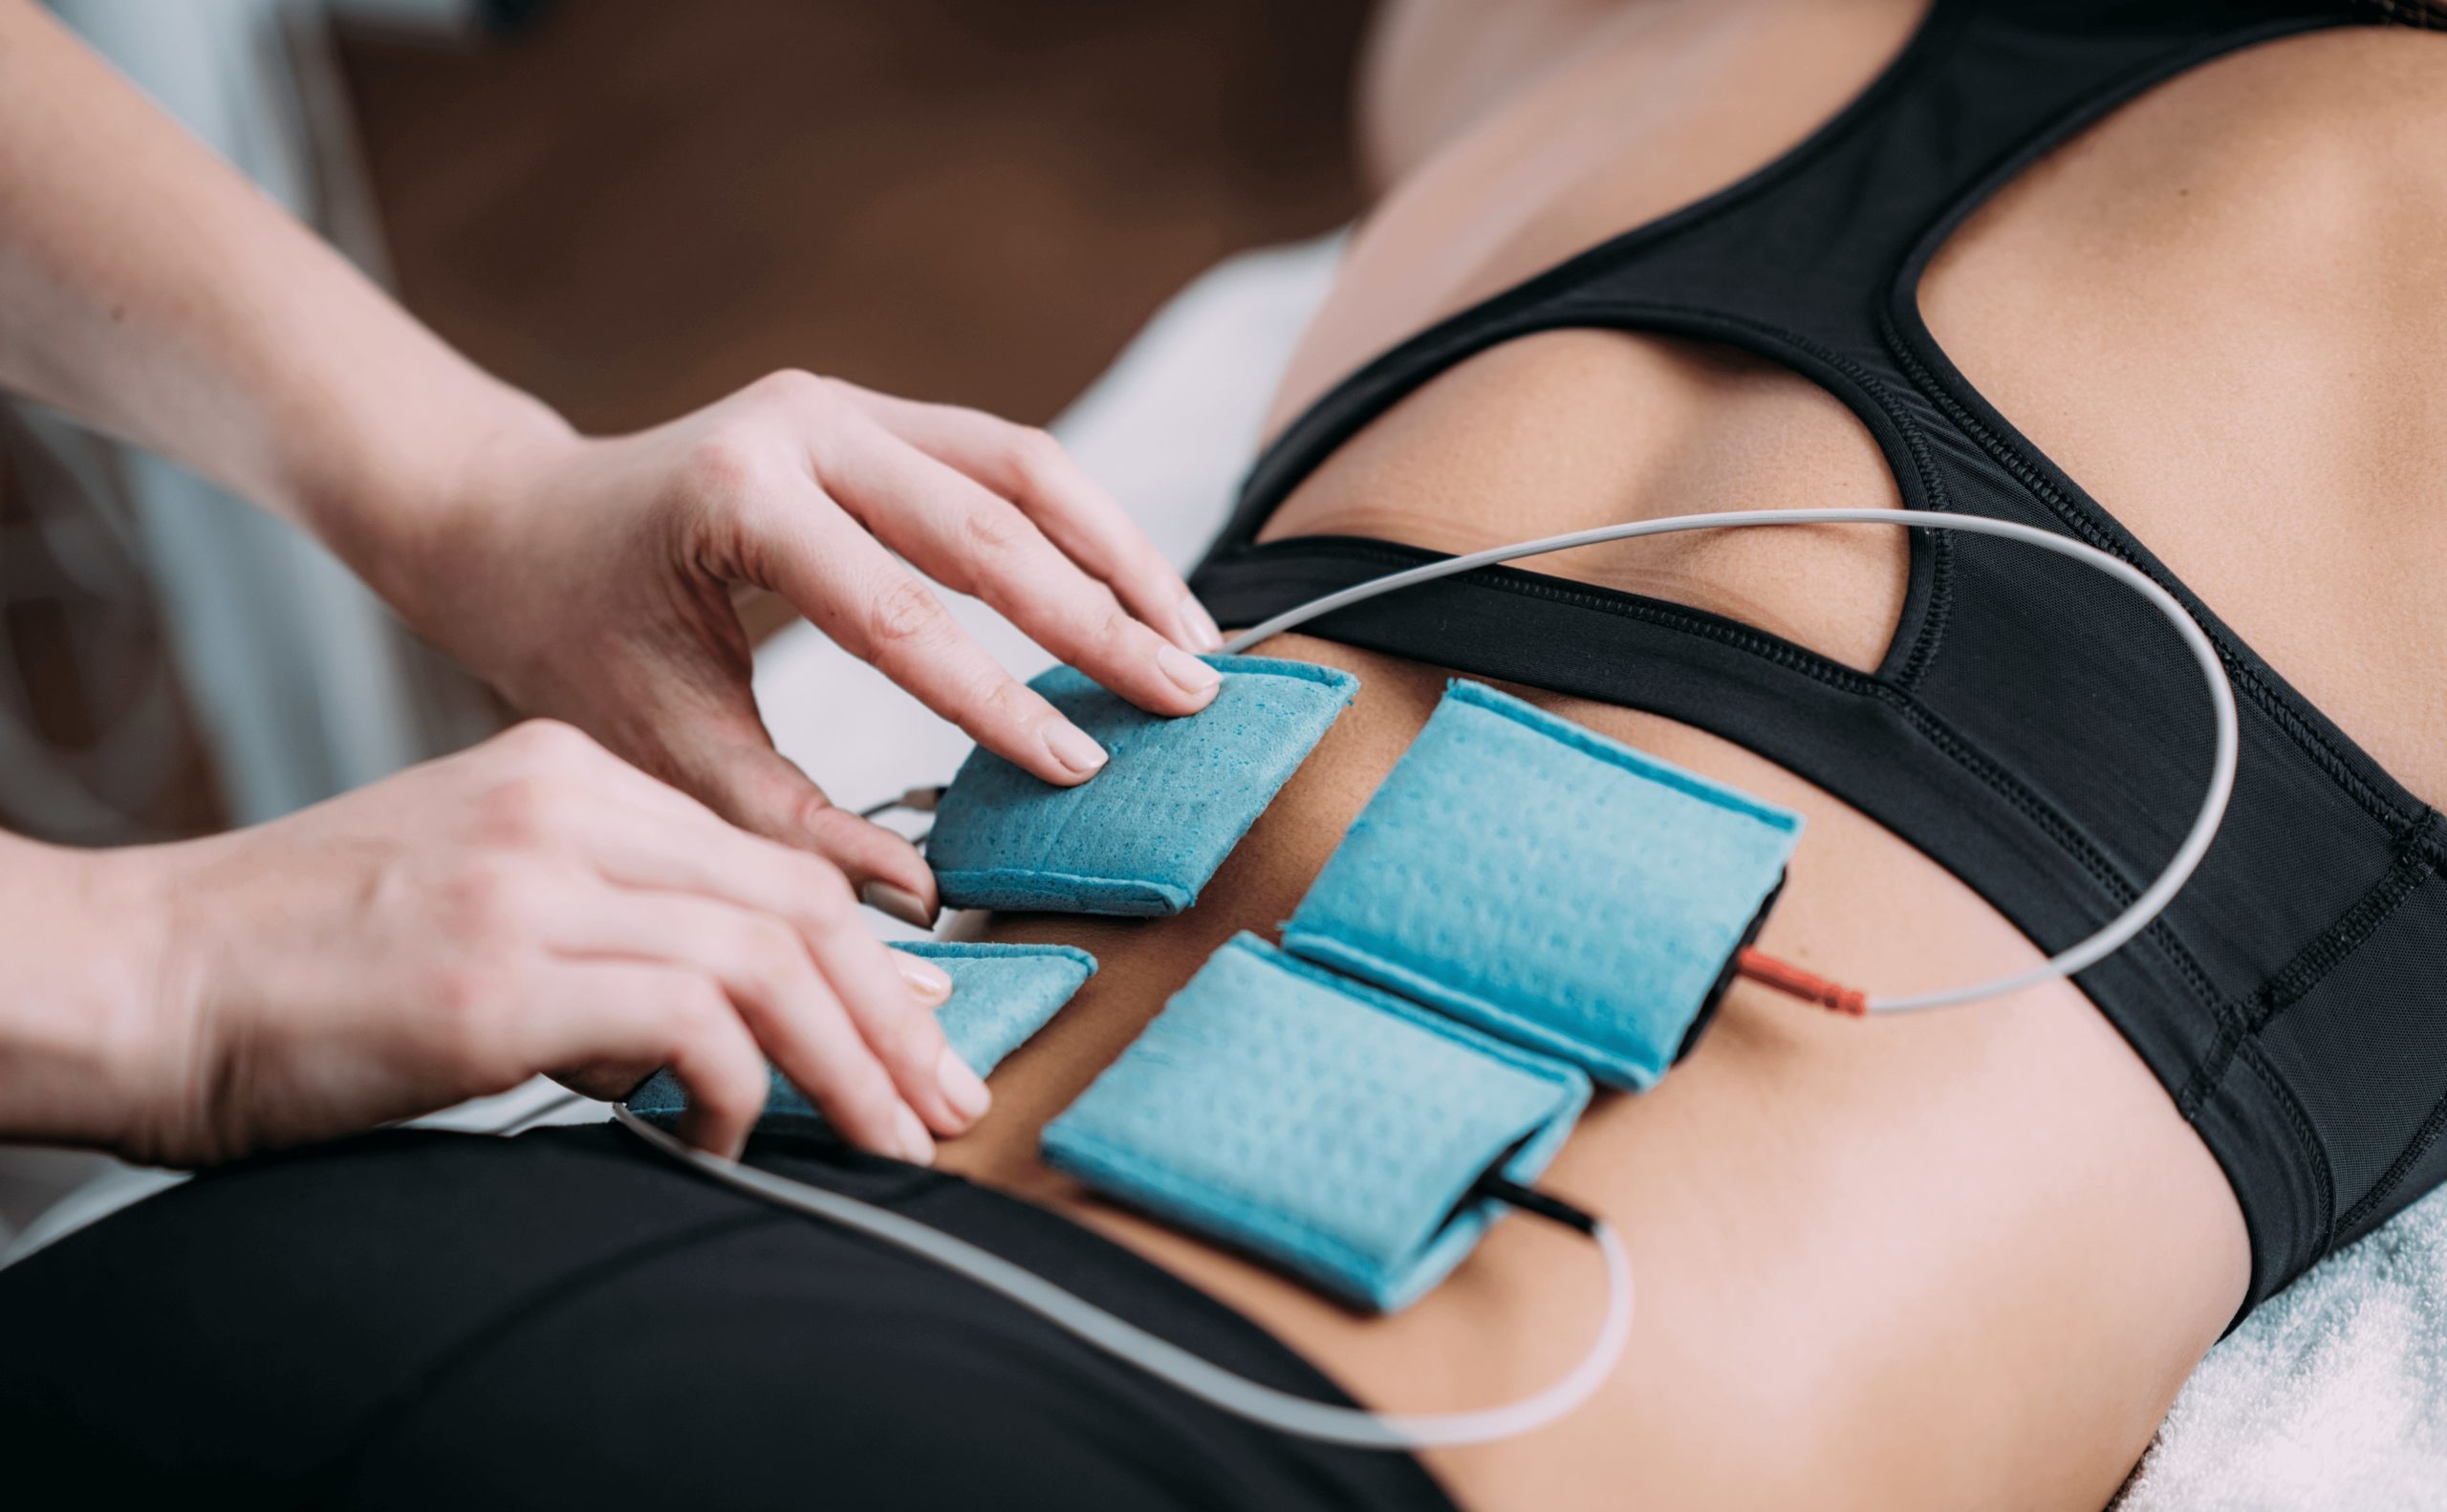 Electrical Muscle Stimulation - T.L.C. Chripractic Center